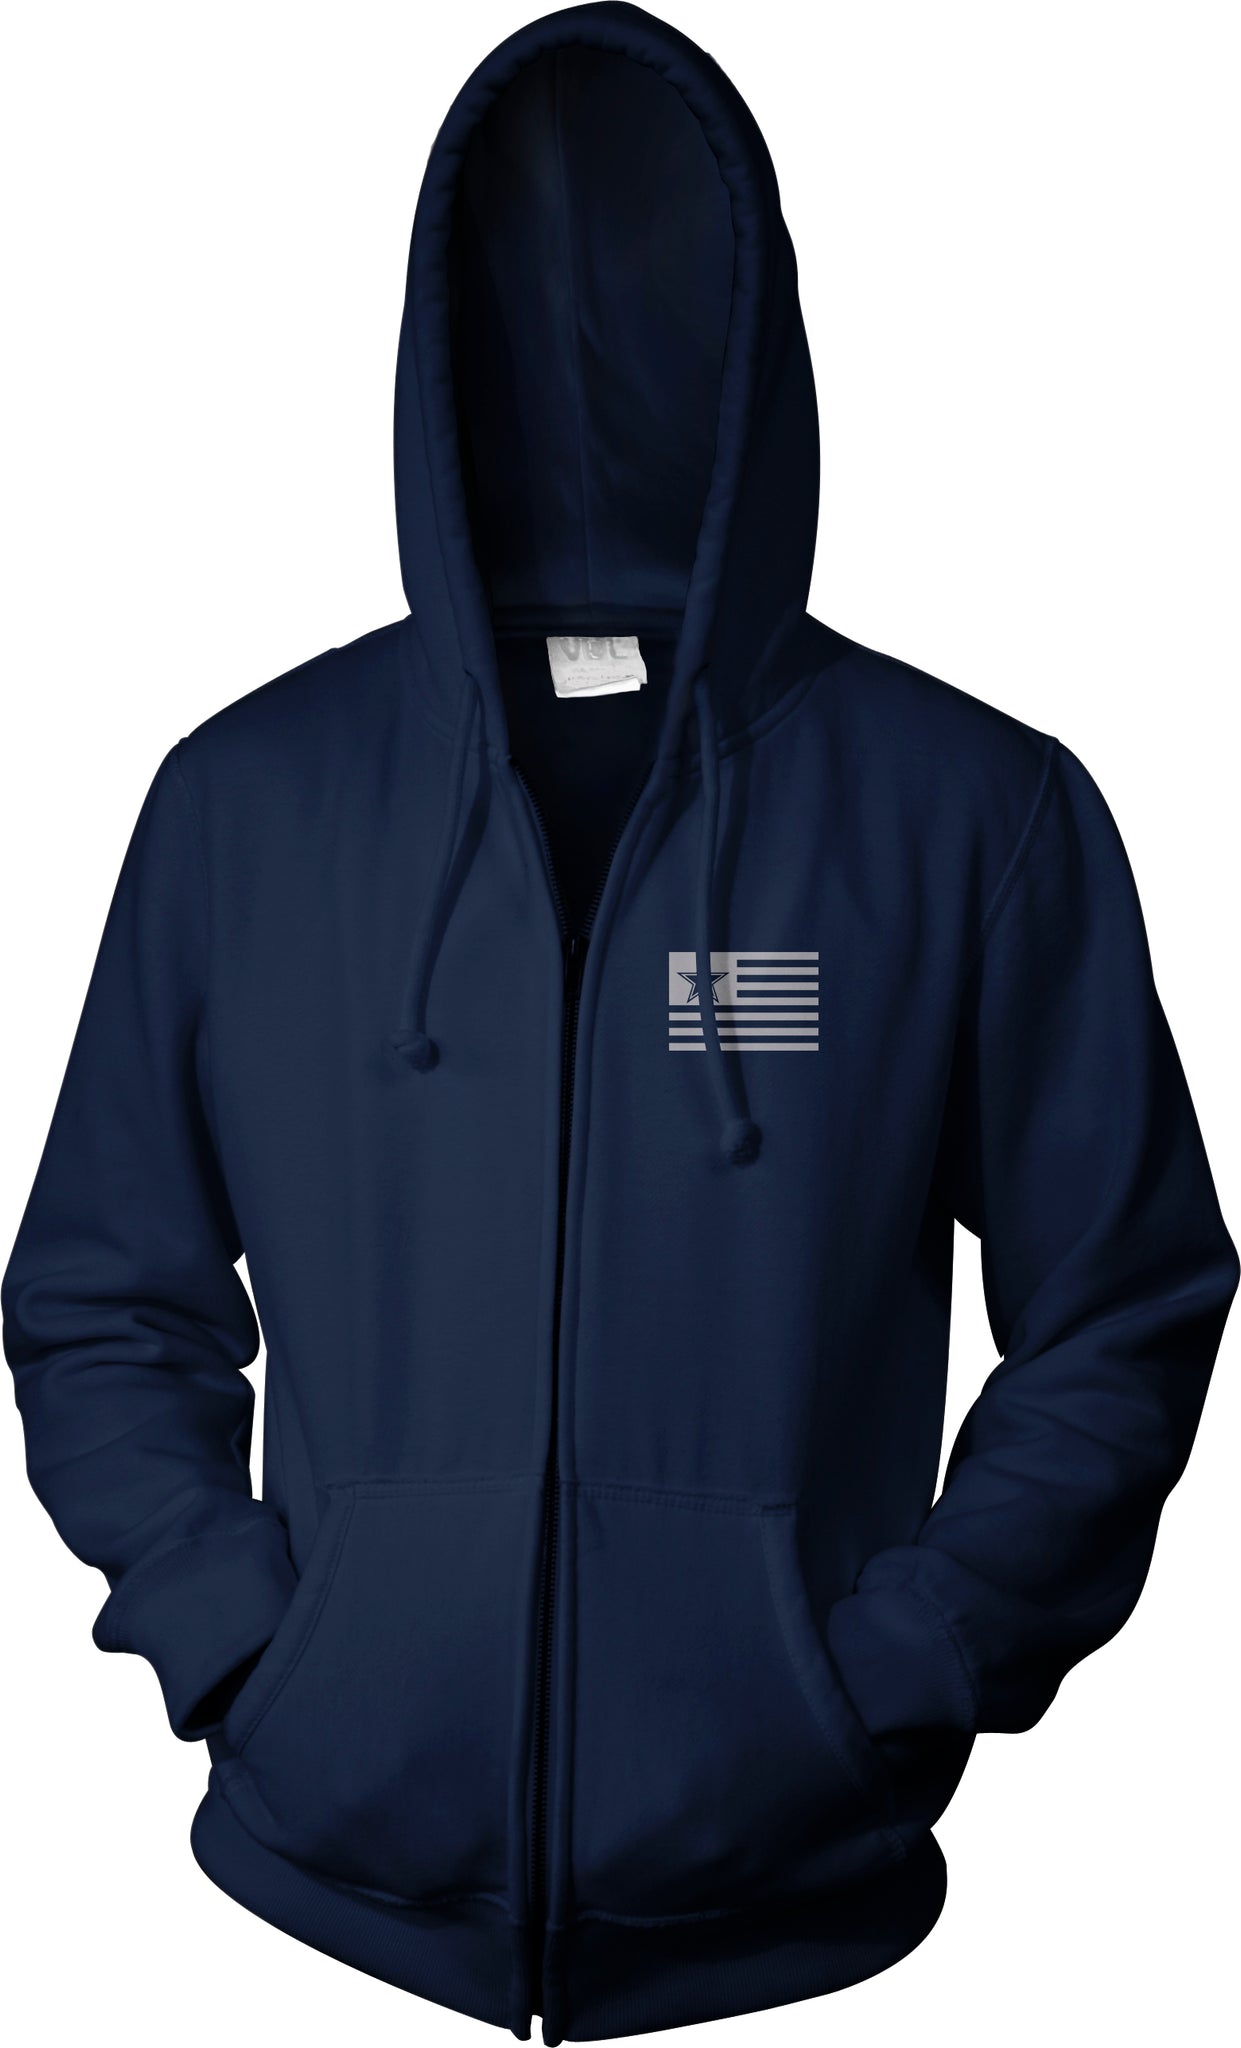 STRAIGHT OUTTA DALLAS NAVY ZIP-UP HOODIE (LIMITED EDITION) COWBOYS ...